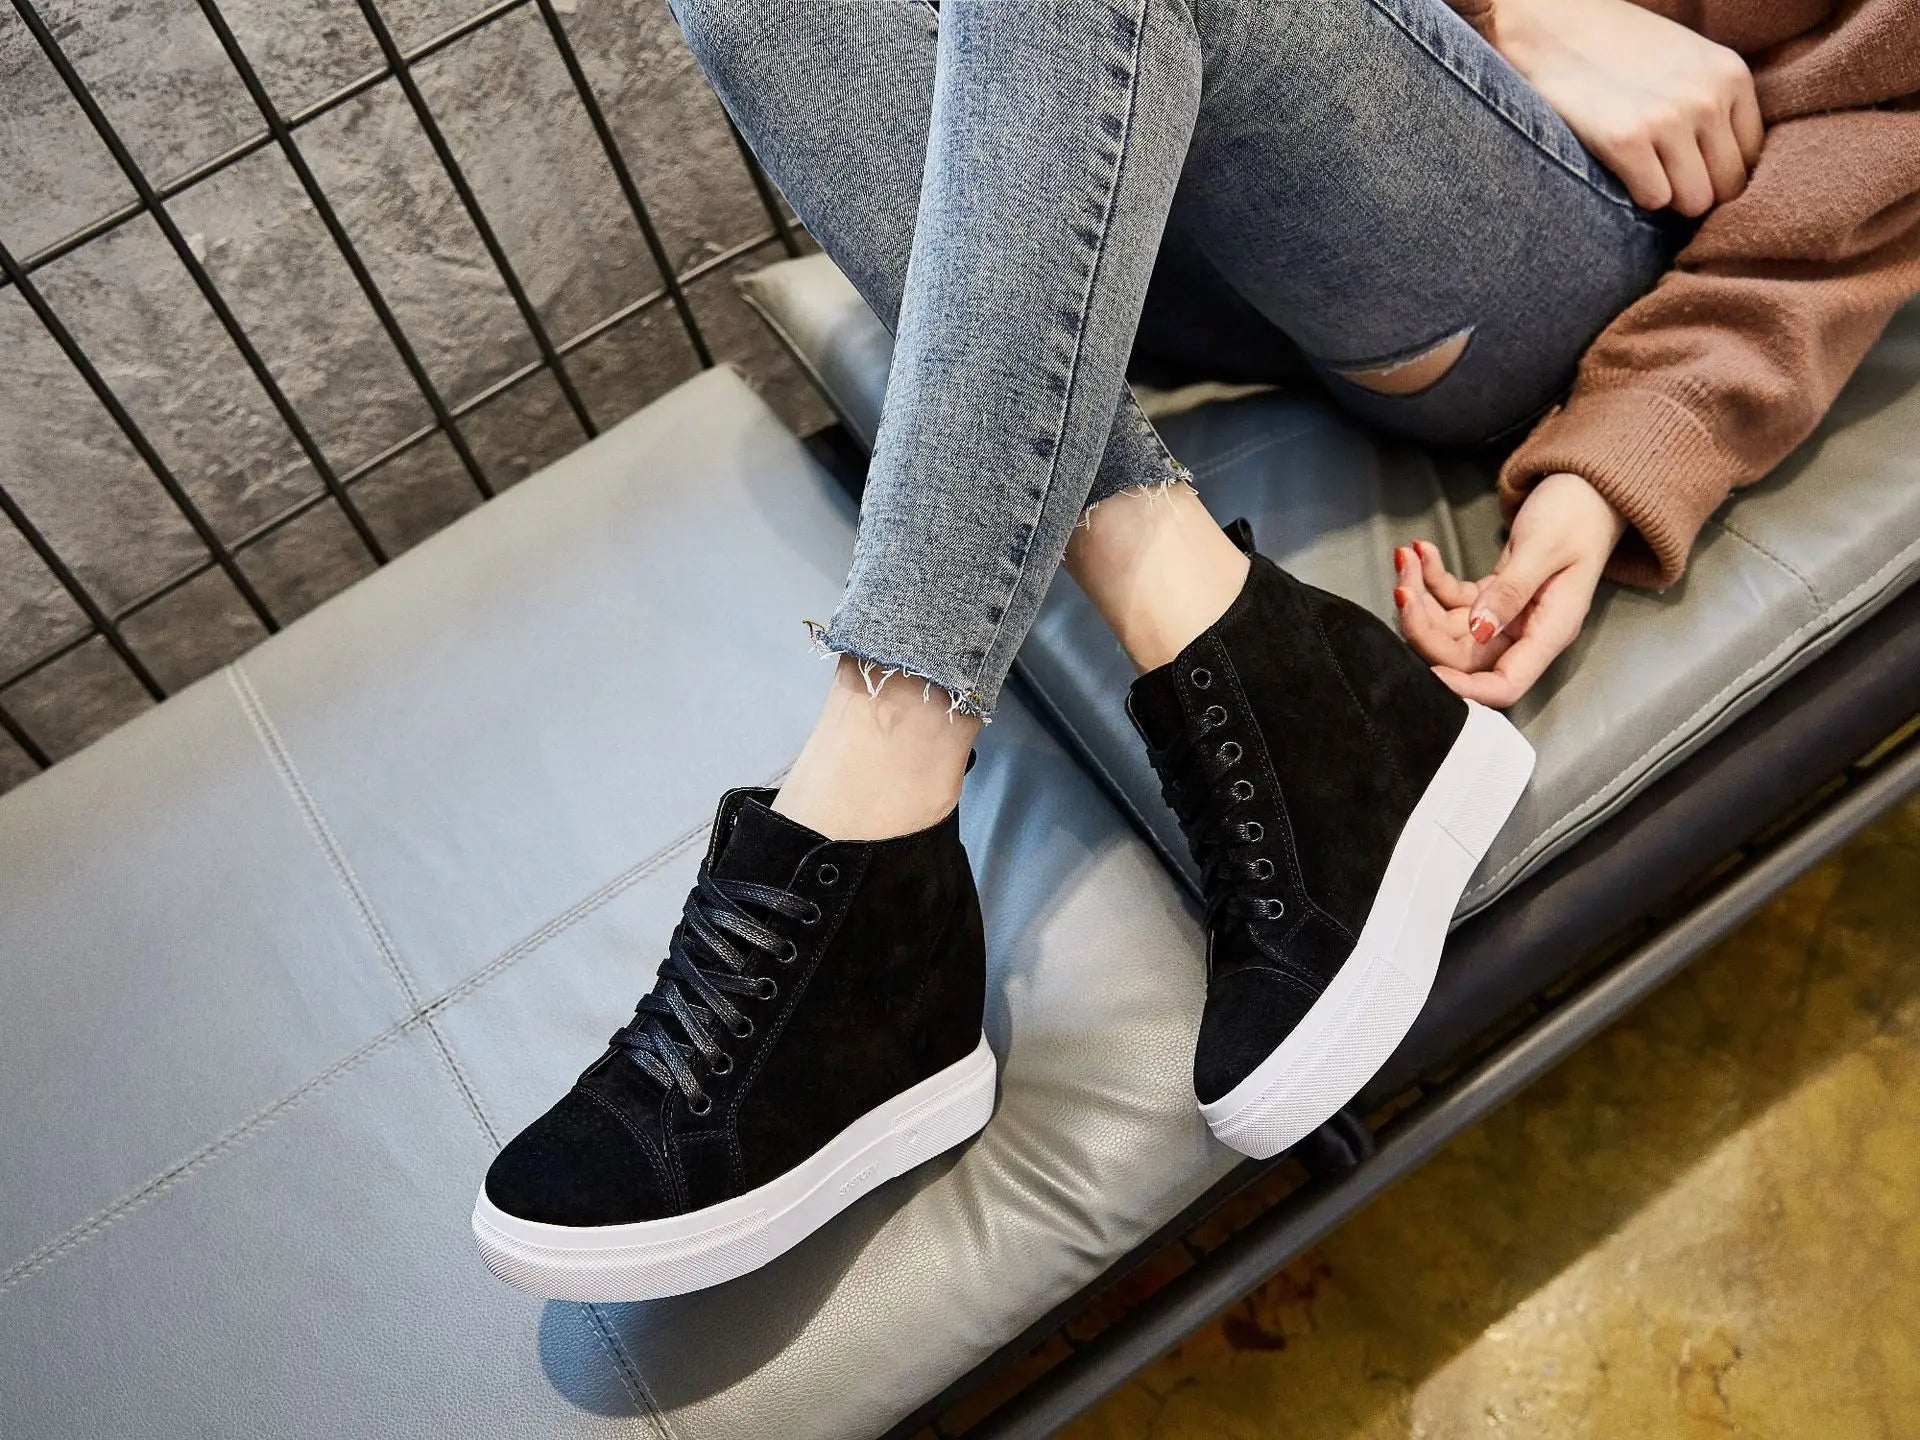 Buy Adokoo Women's Canvas Shoes Lace Up Low Top Fashion Sneaker Casual Cute  Walking Shoe(Black,US5) at Amazon.in